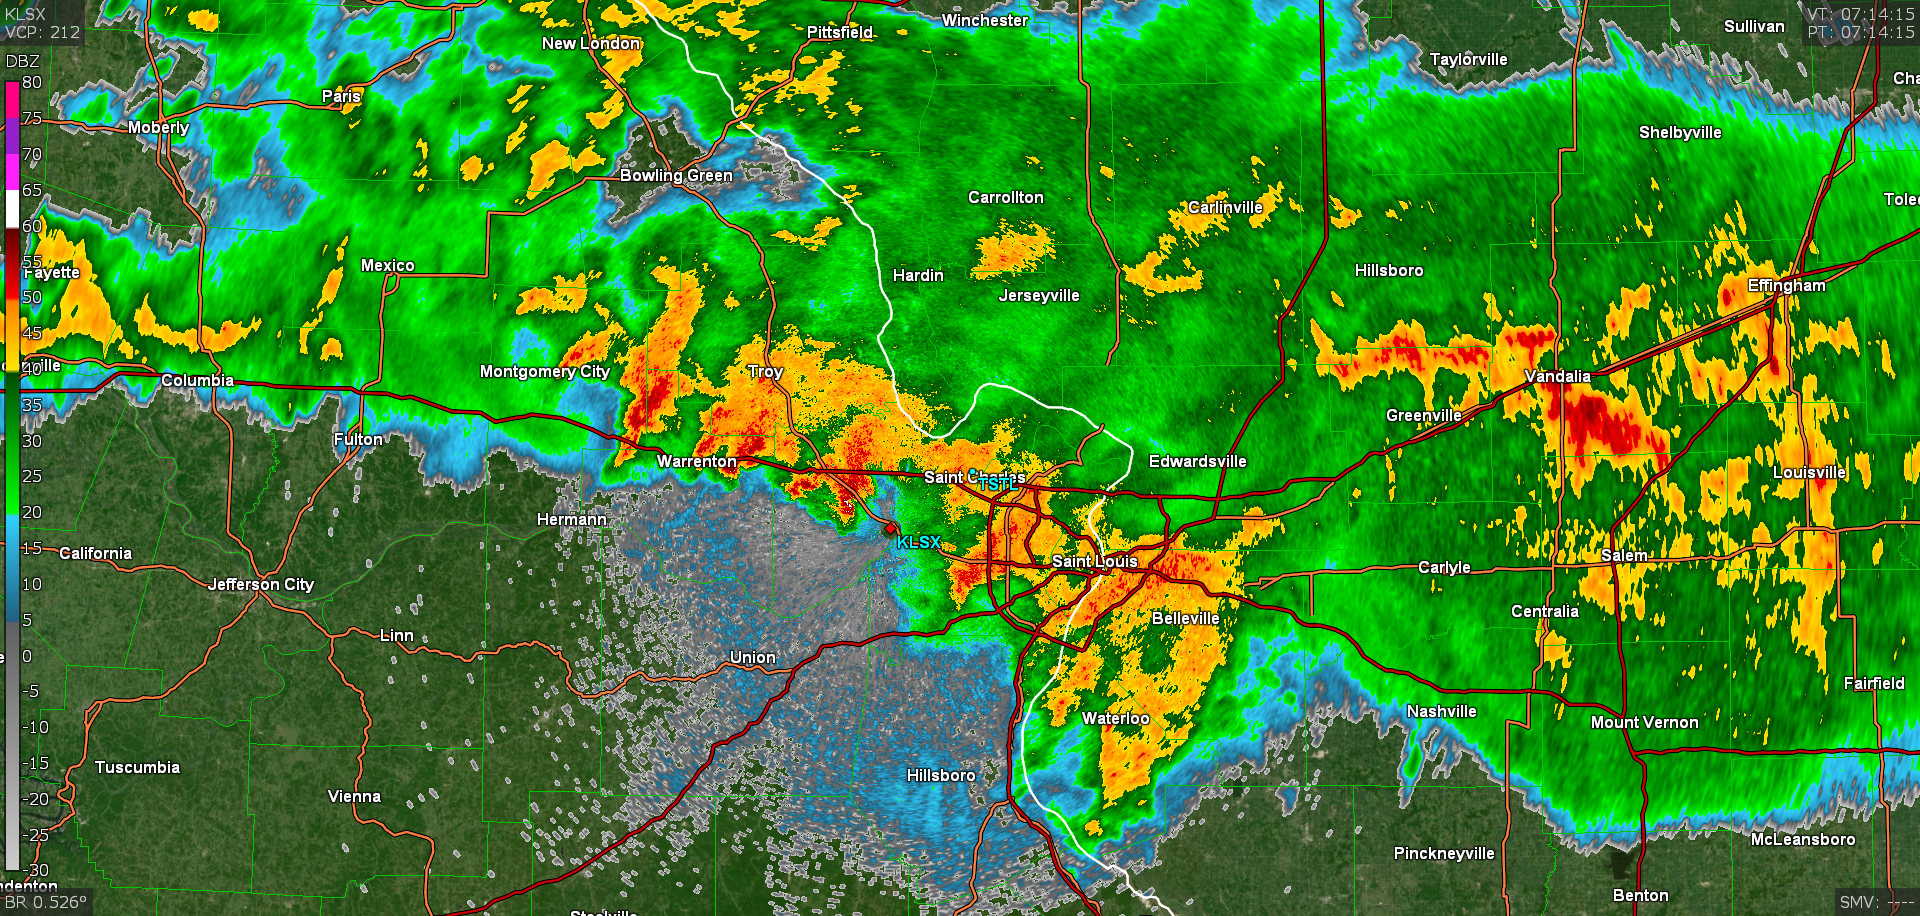 Image of radar reflectivity from KLSX in St. Louis valid at 2:14am July 26th.